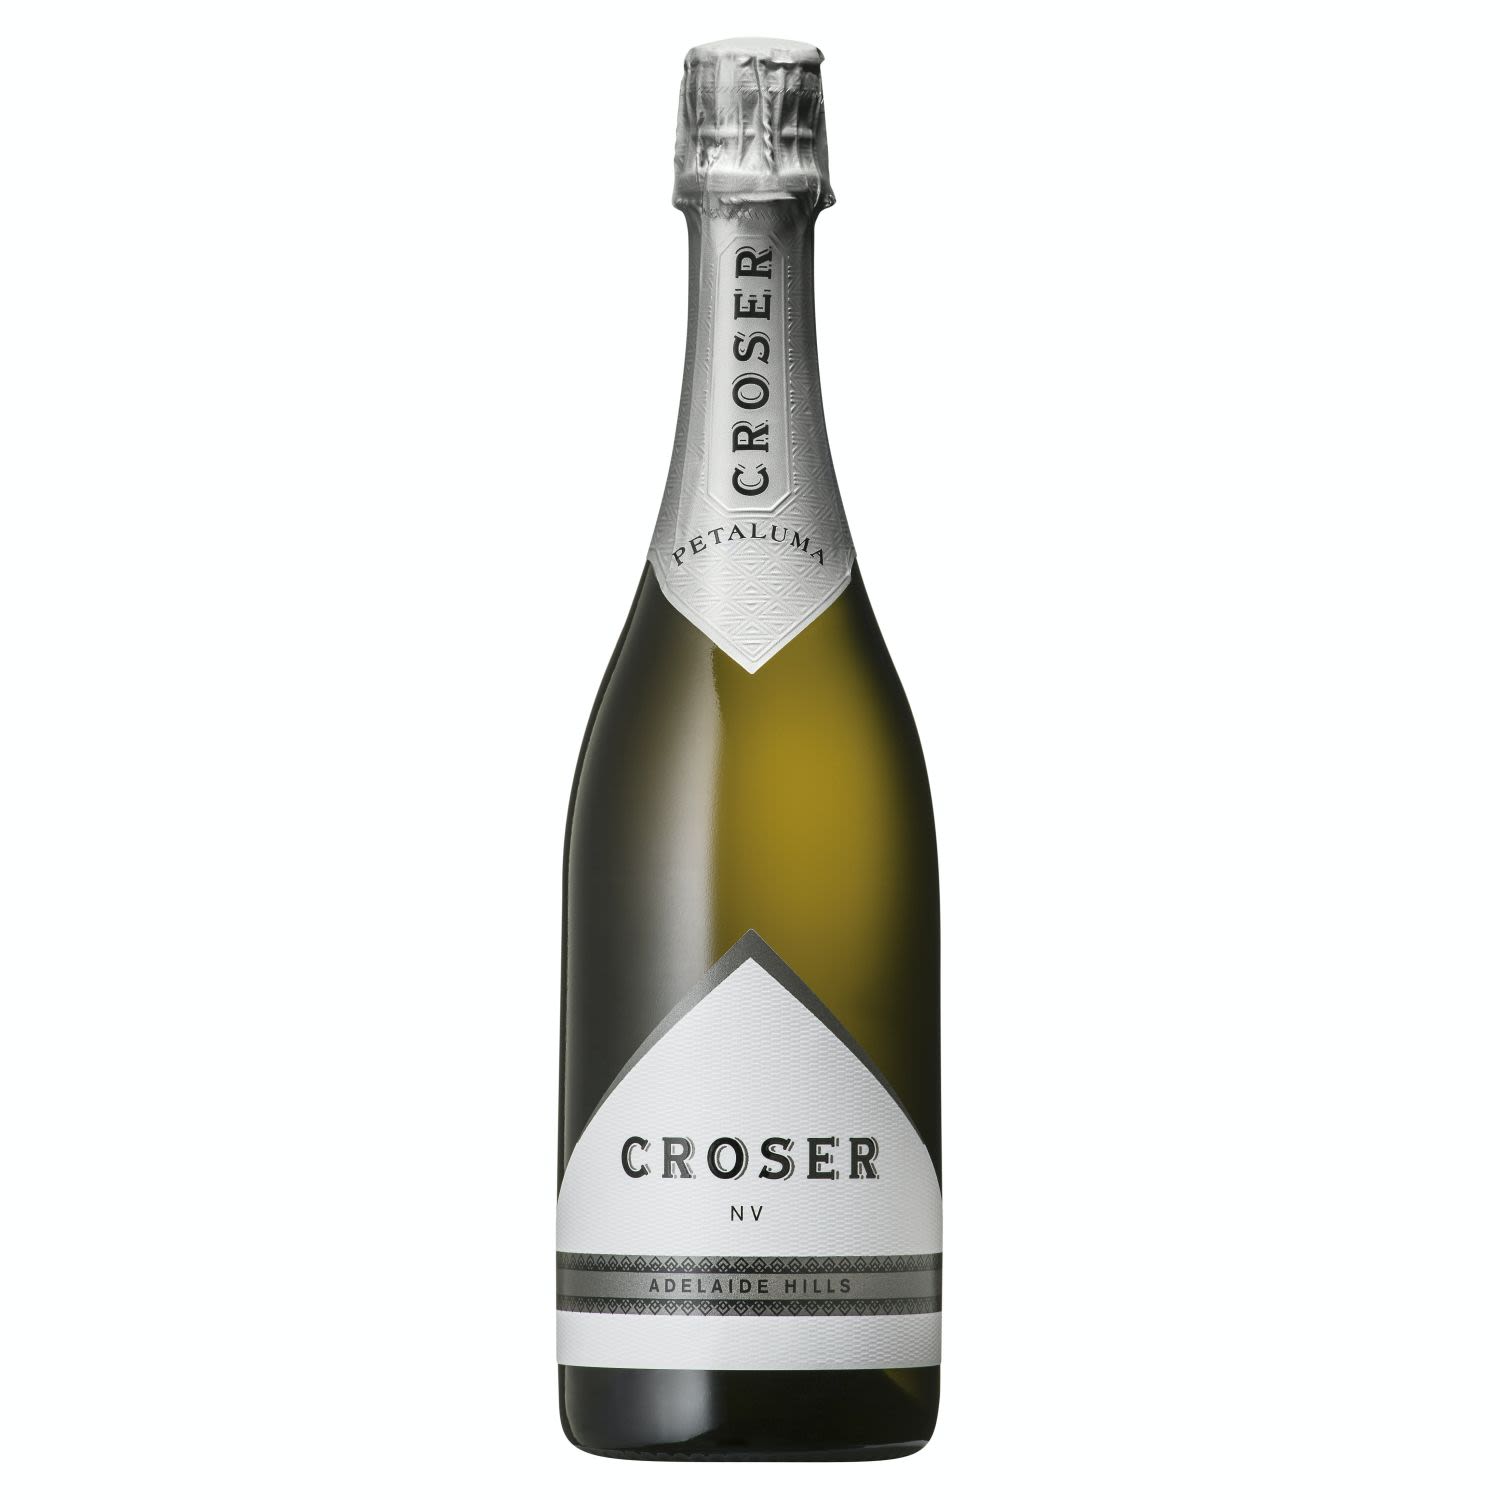 A true aperitif style sparkling wine that blends the rich strawberry lift and fine mousse of Pinot Noir with the nectarine, cashew and biscuity Chardonnay characters.<br /> <br />Alcohol Volume: 13.50%<br /><br />Pack Format: Bottle<br /><br />Standard Drinks: 8</br /><br />Pack Type: Bottle<br /><br />Country of Origin: Australia<br /><br />Region: Adelaide<br /><br />Vintage: Non Vintage<br />